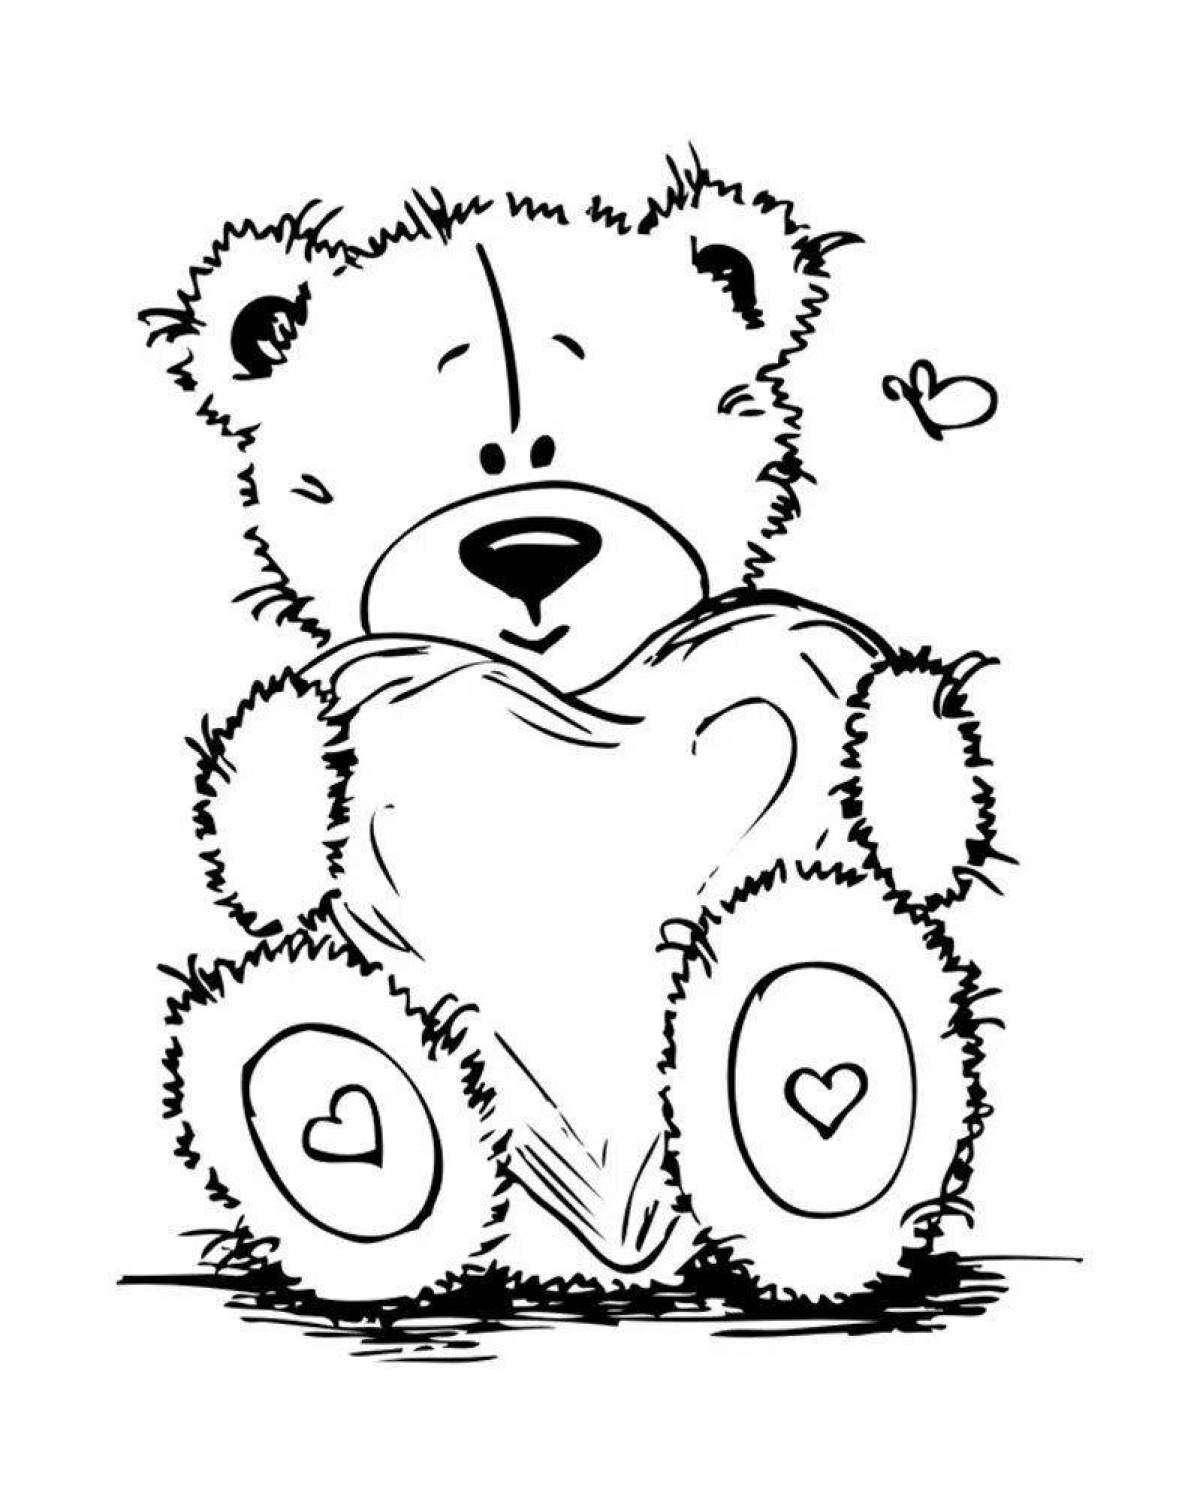 Soft teddy bear with heart coloring book